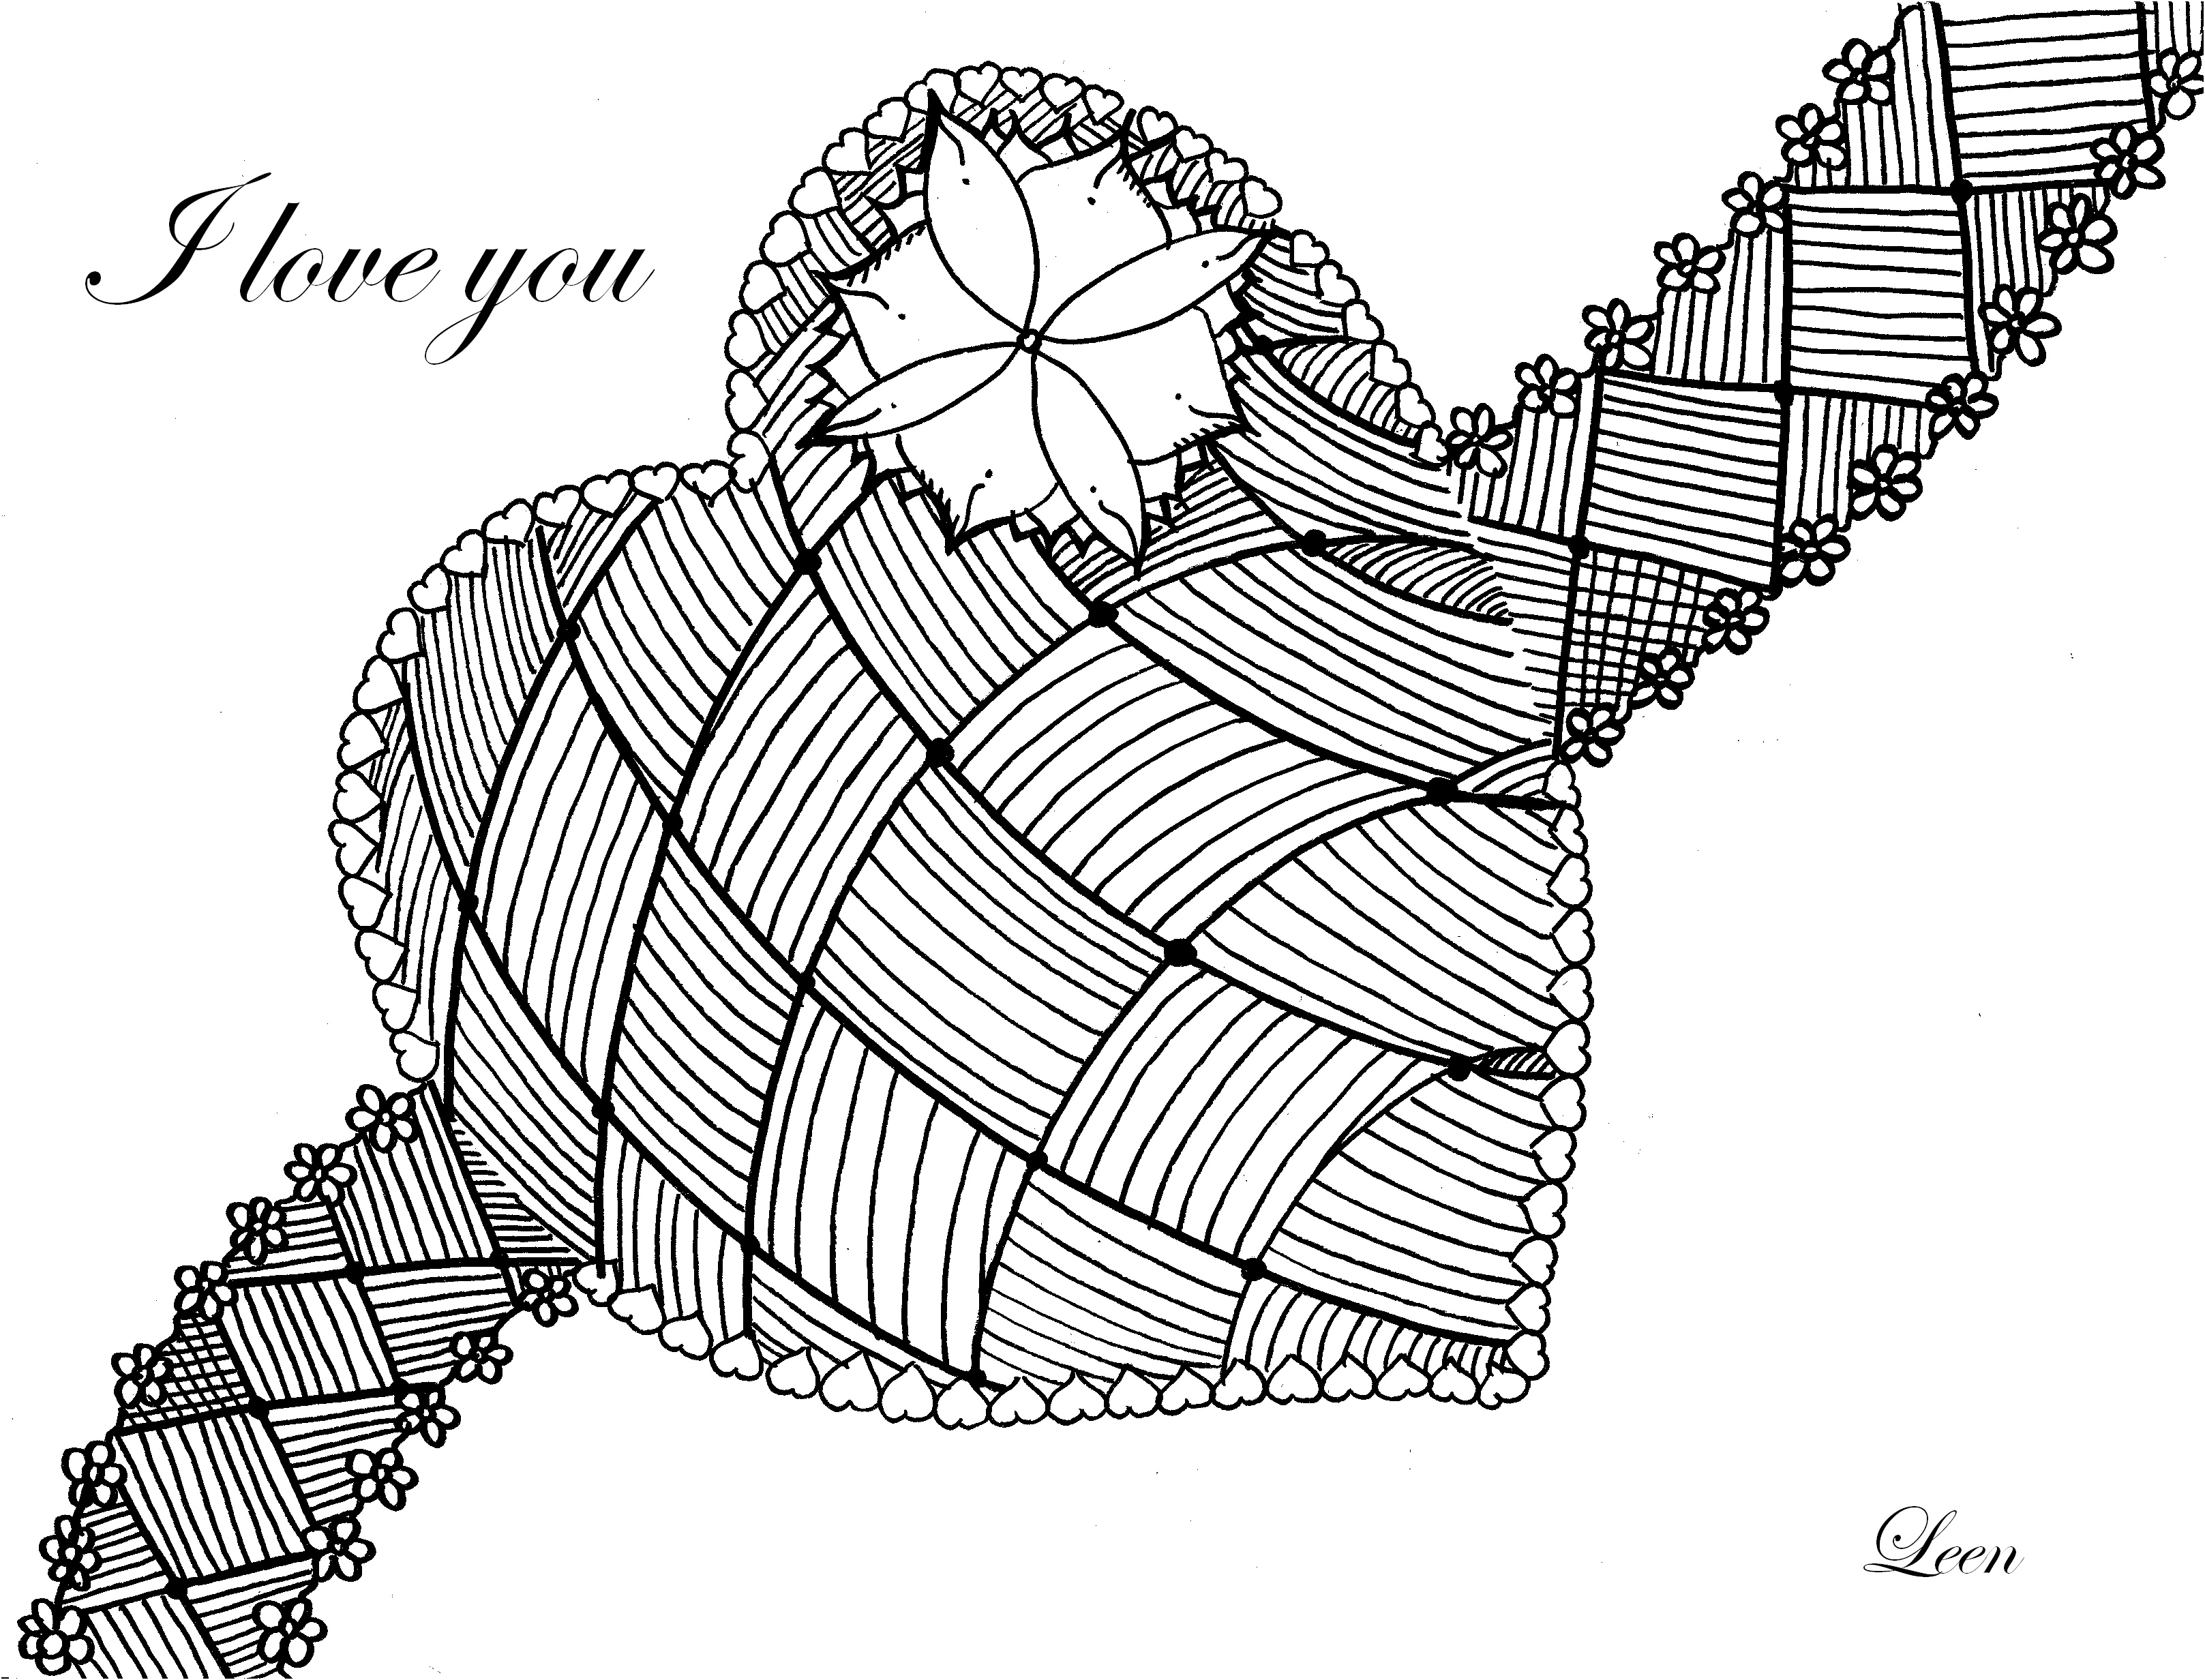 4 image=anti stress coloriage love heart by leen margot 3